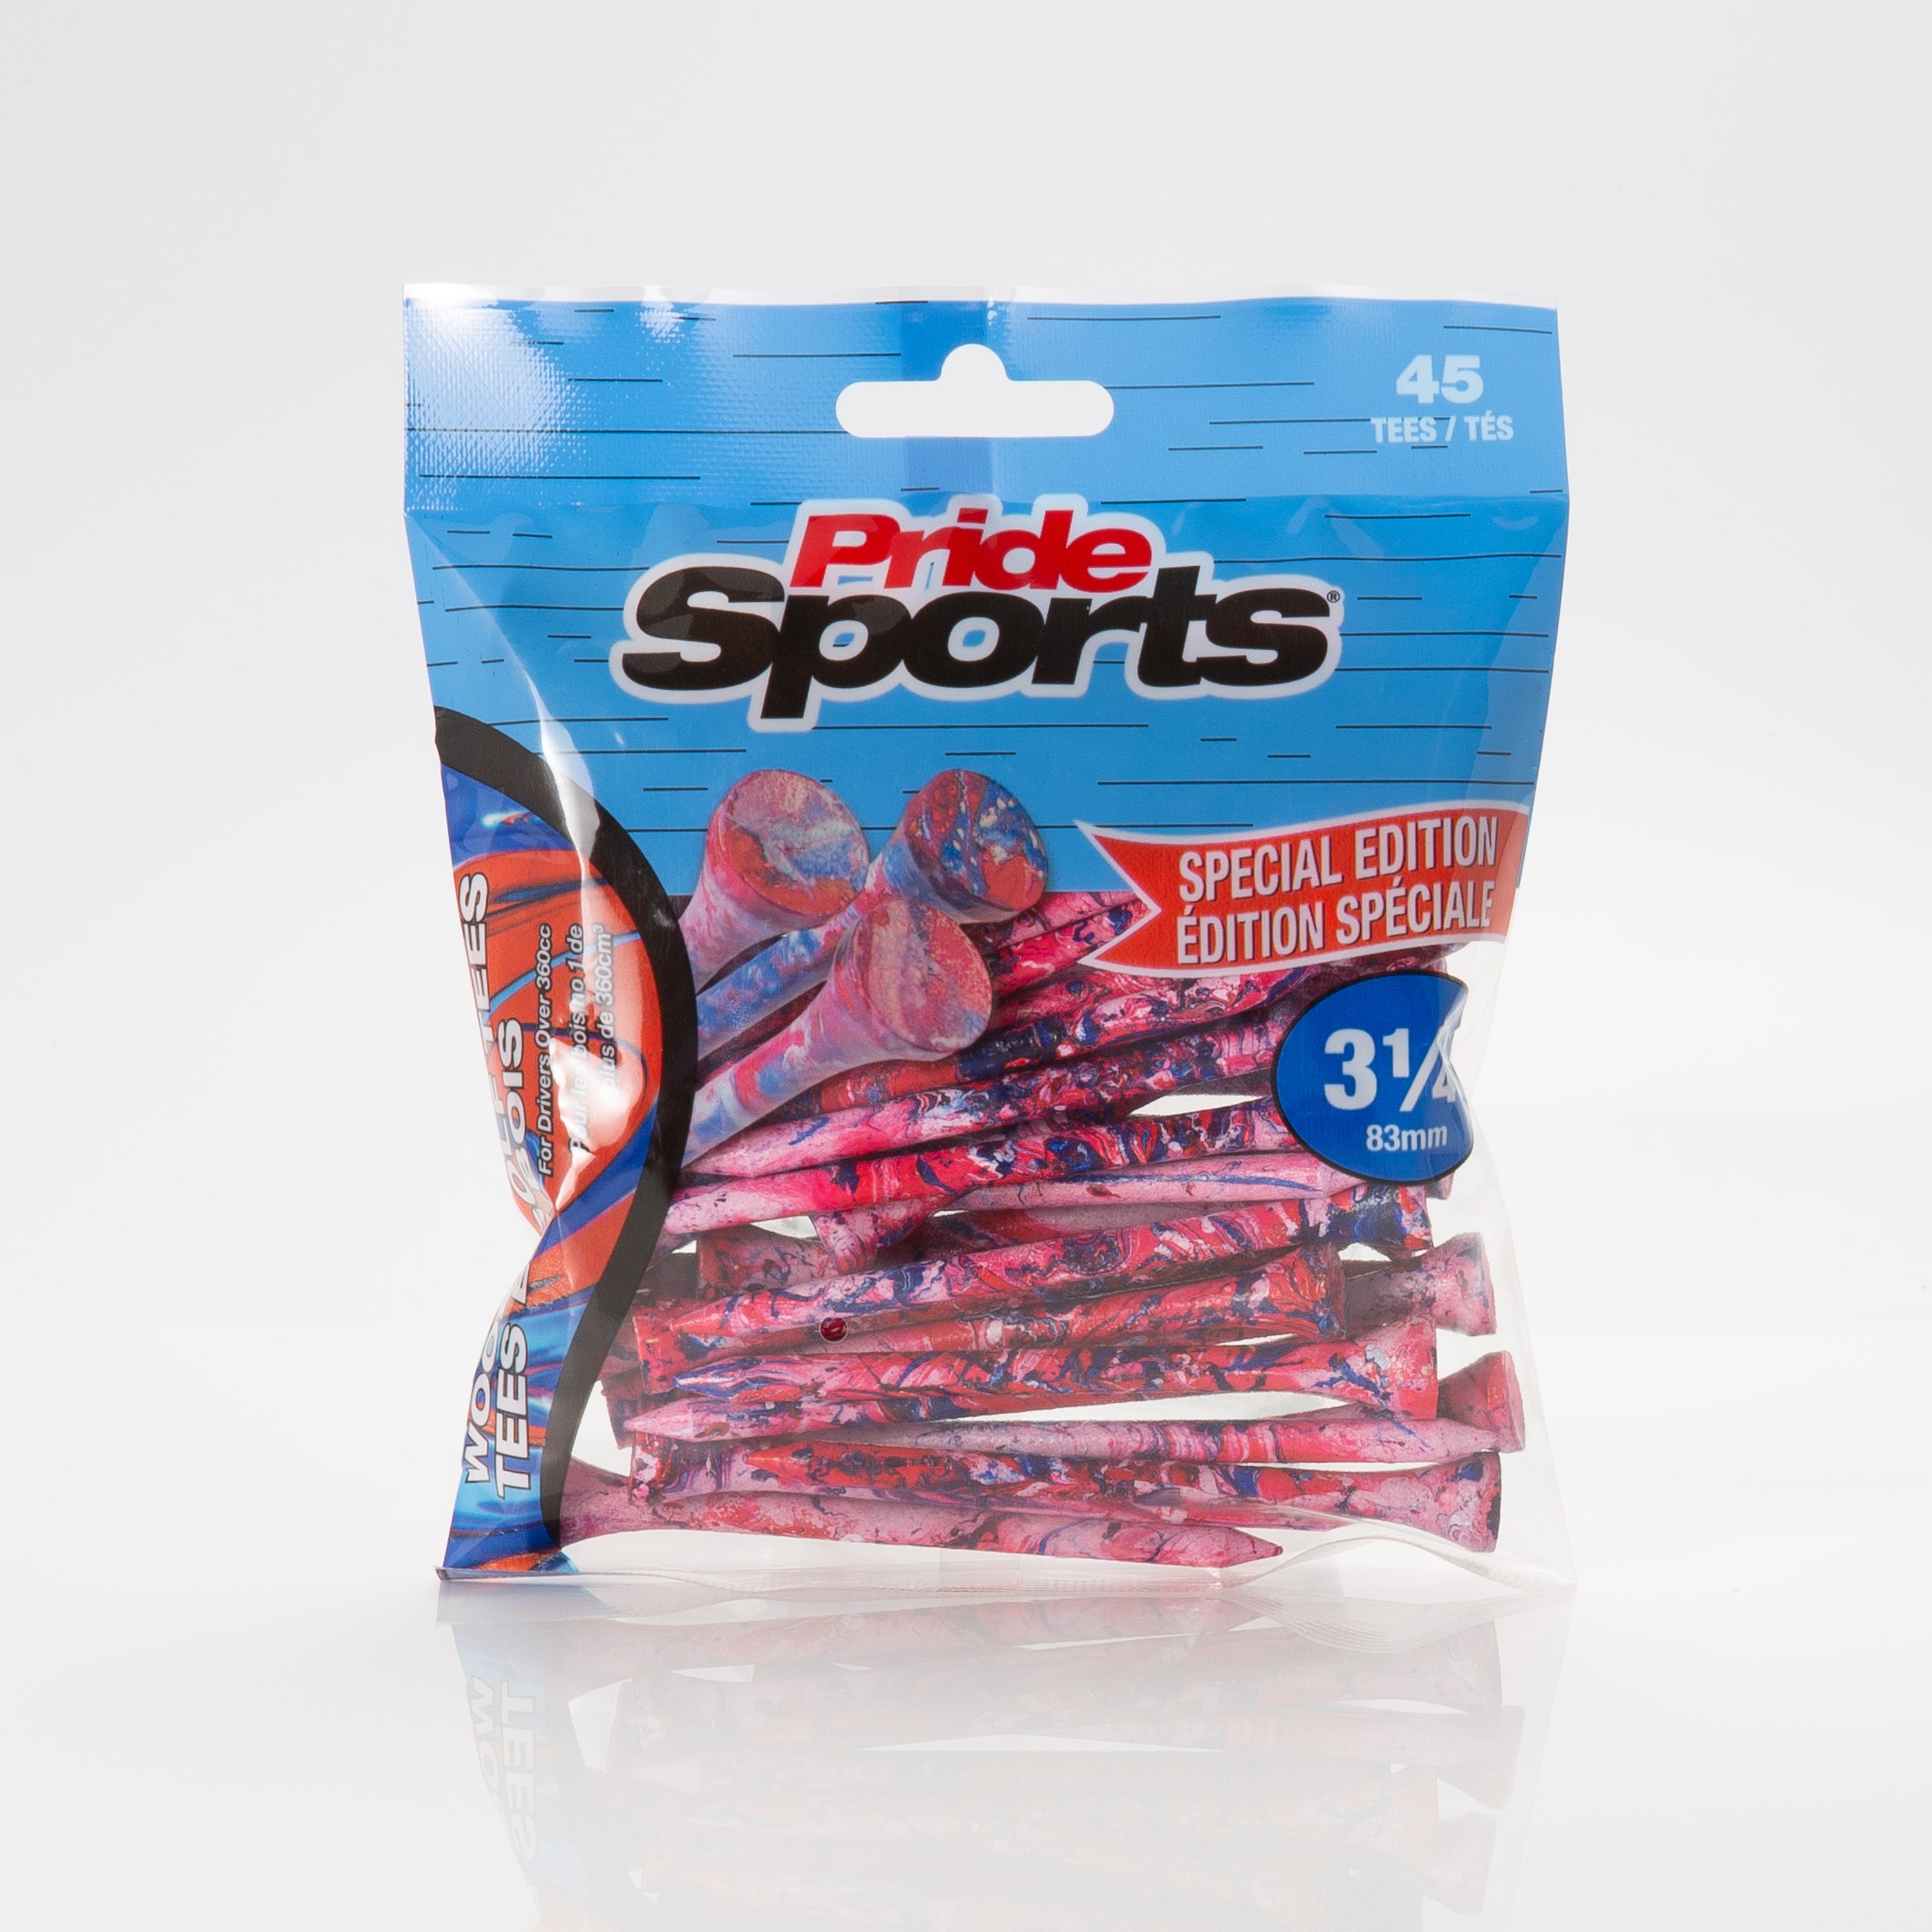 Pridesports  Special Edition Paint Splatter (Red/Blue) - Available in 2 sizes